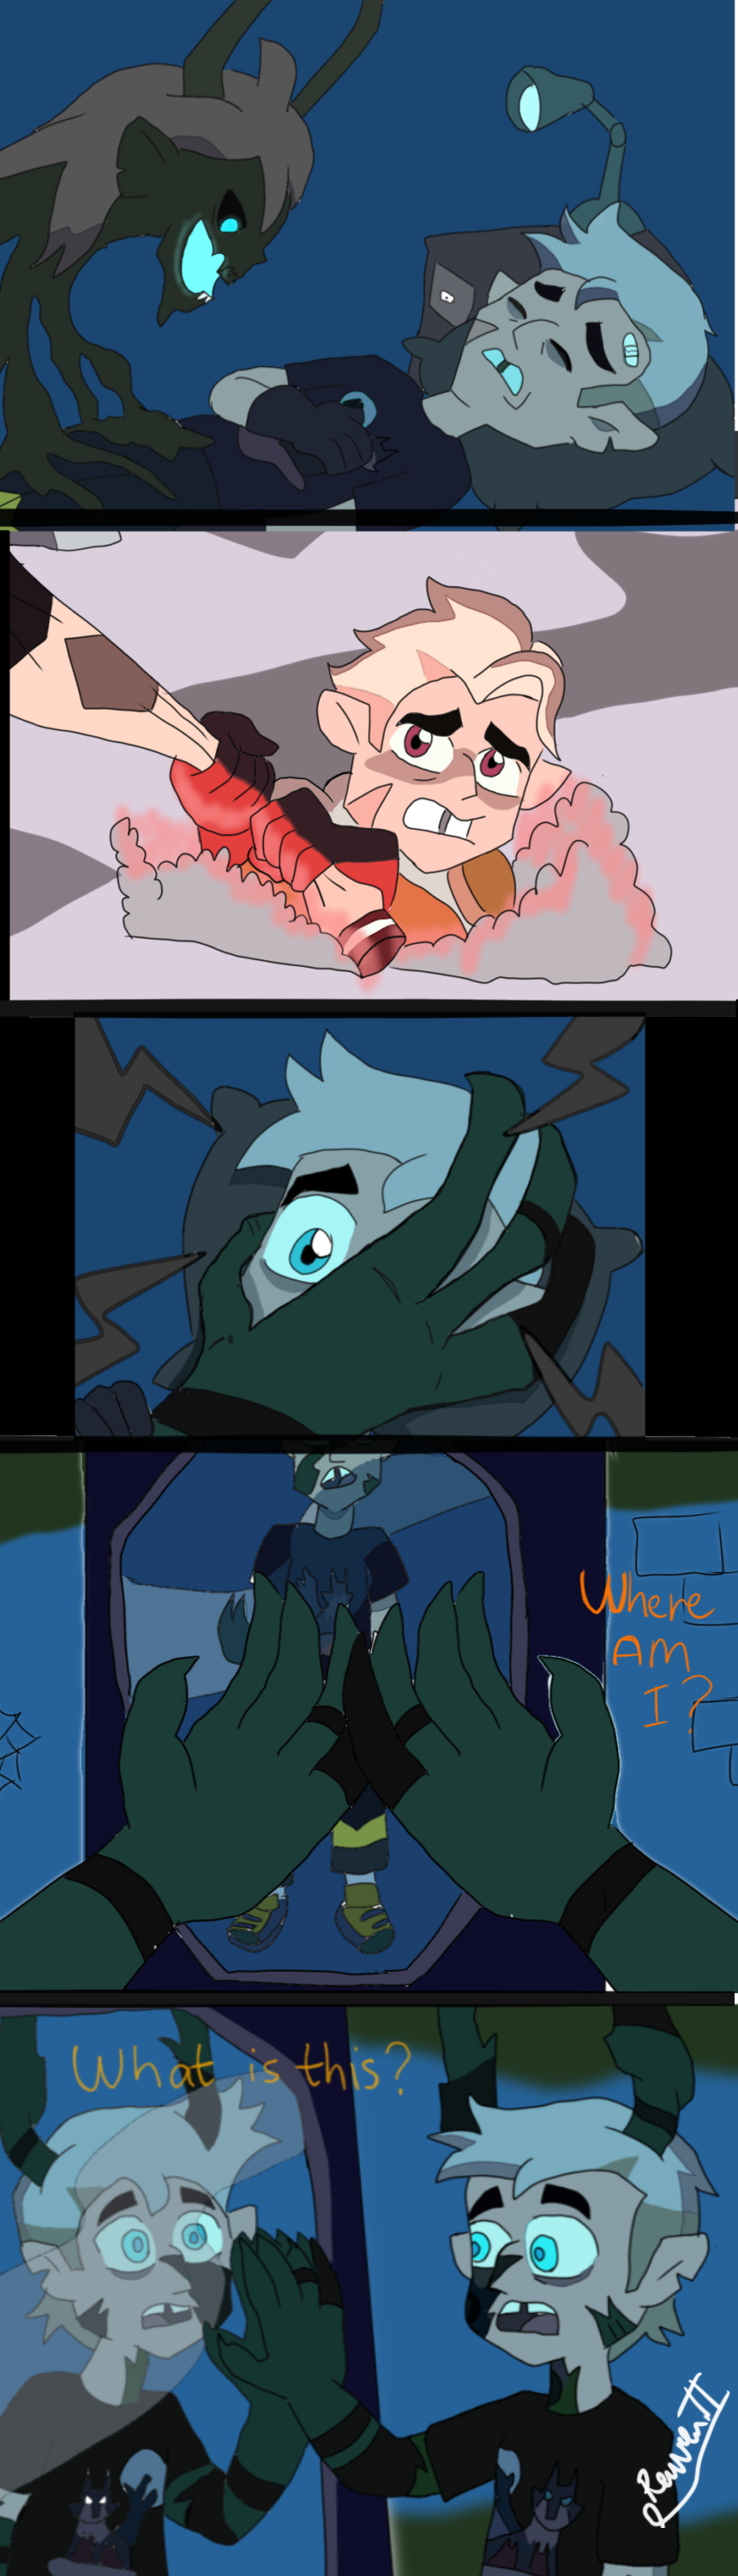 Owl house fan comic: Luz gets possessed by the Collector part 1 